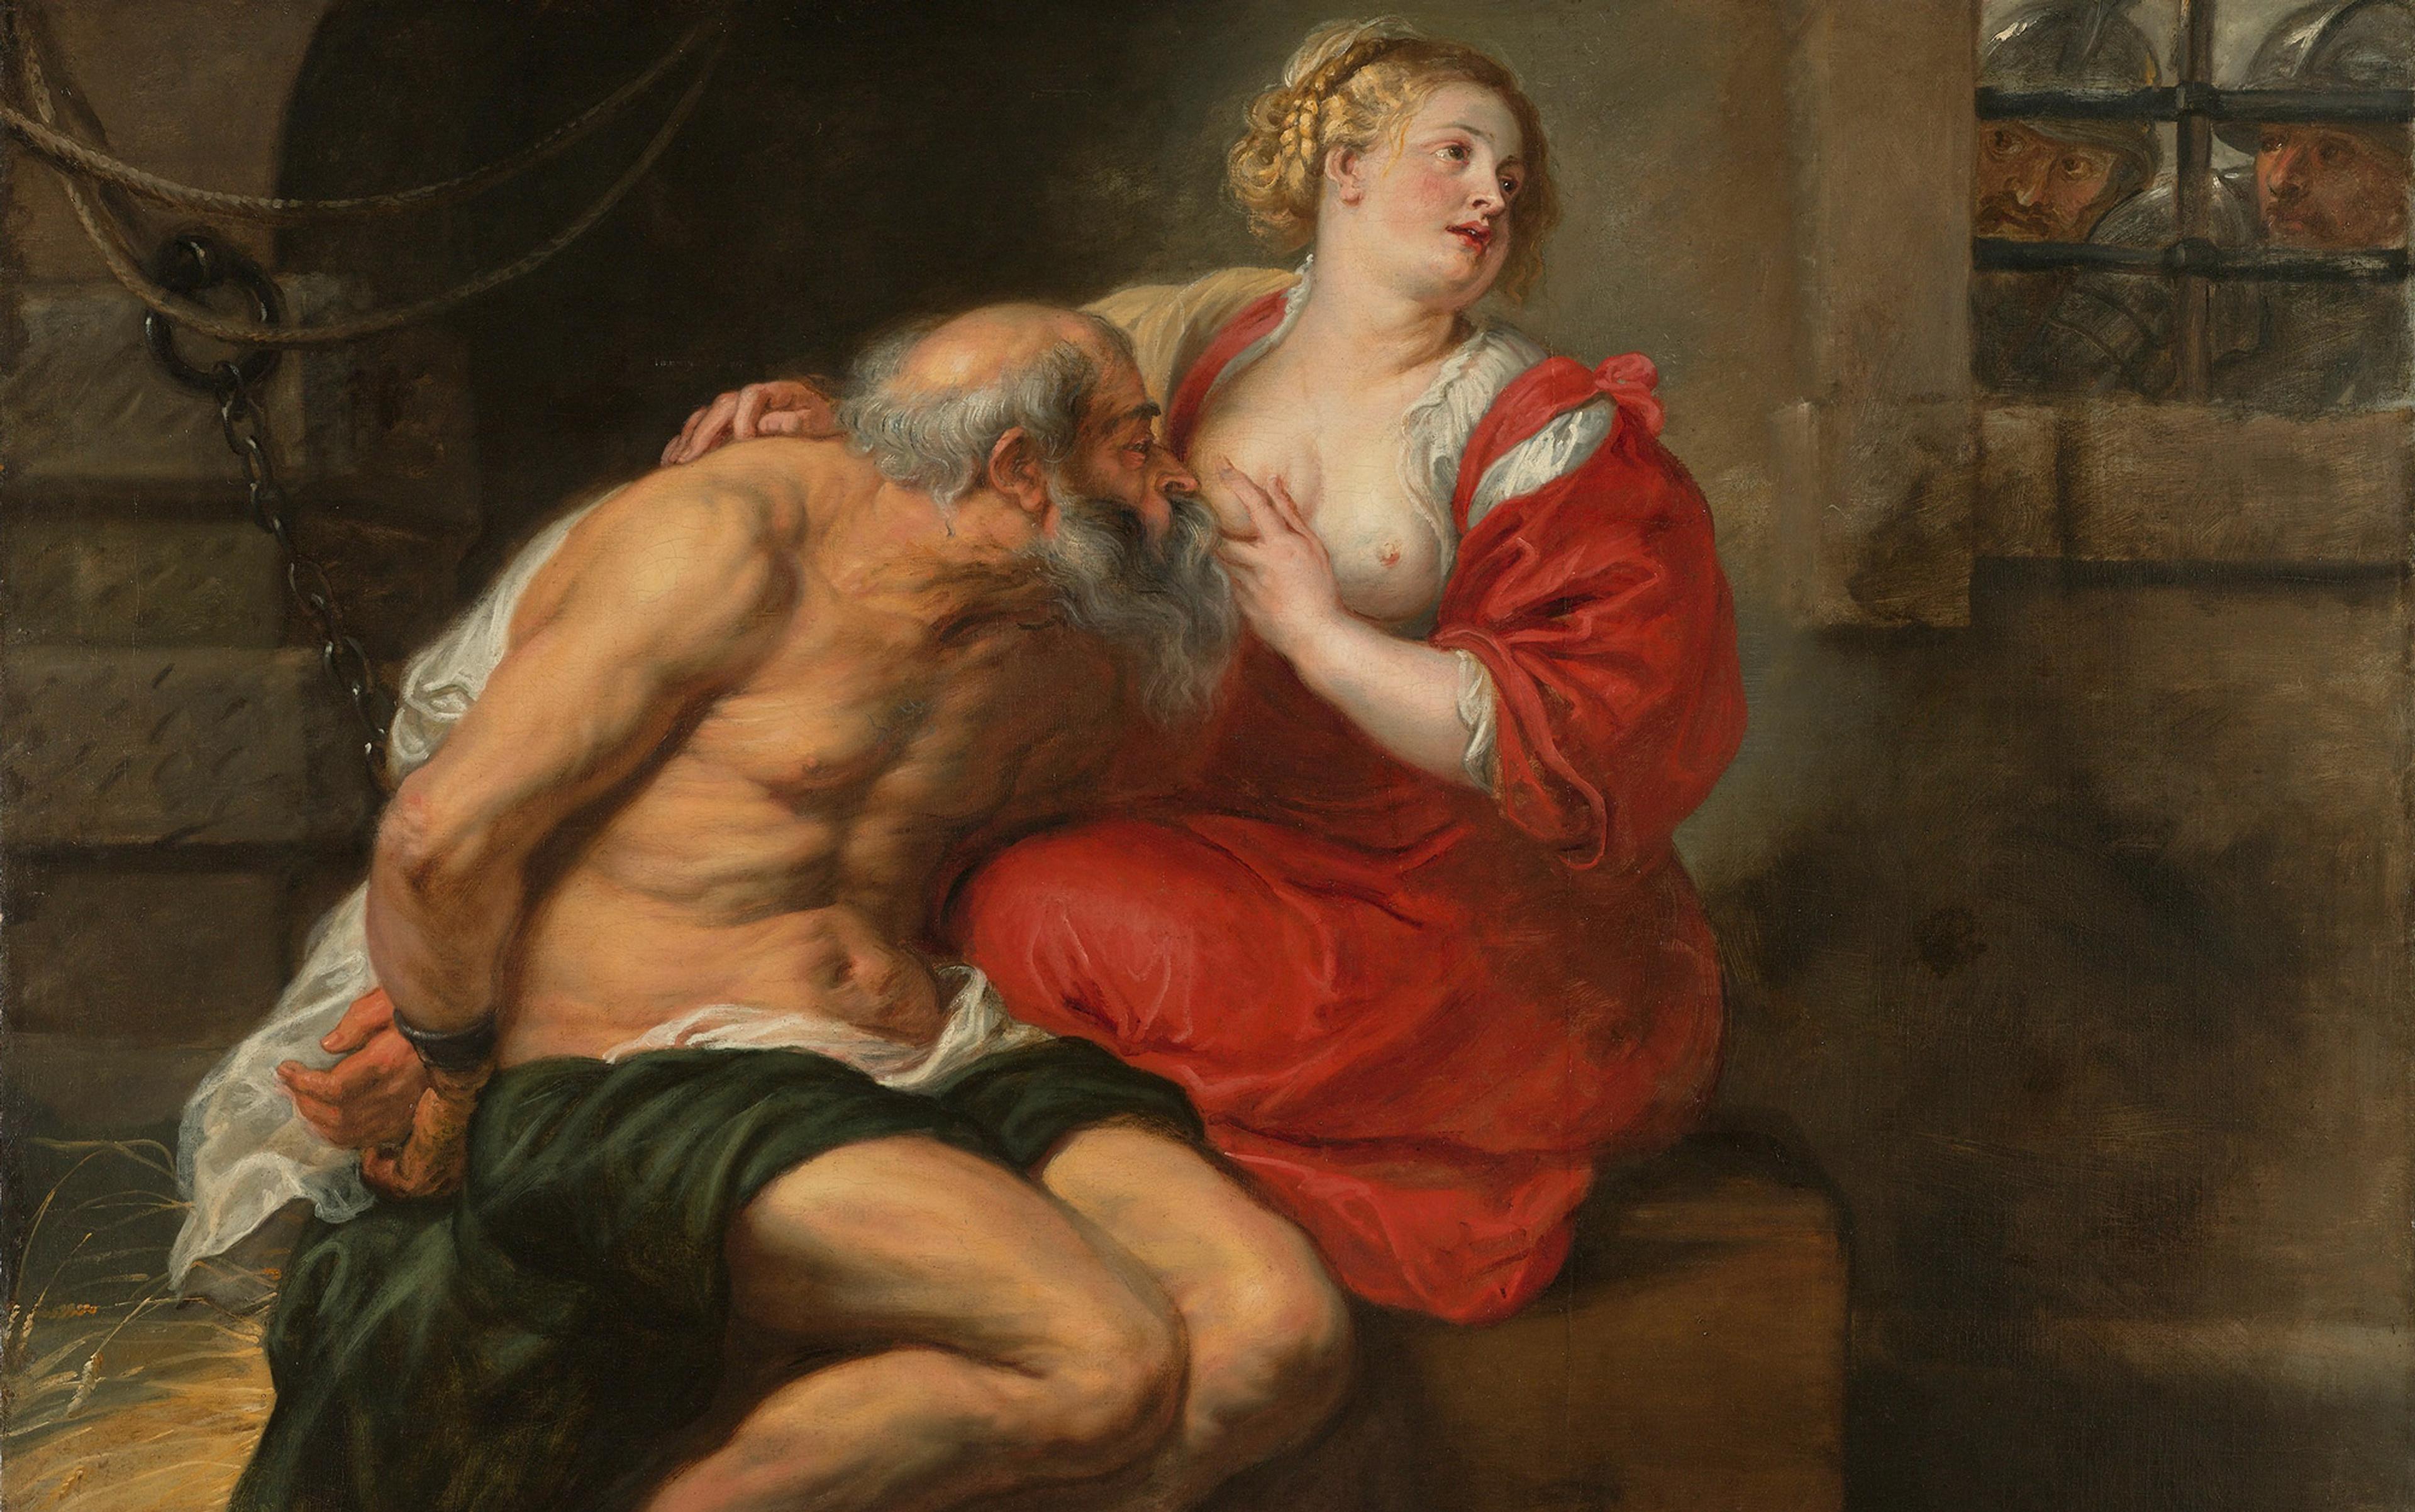 On Roman Charity, or a woman's filial debt to the patriarchy